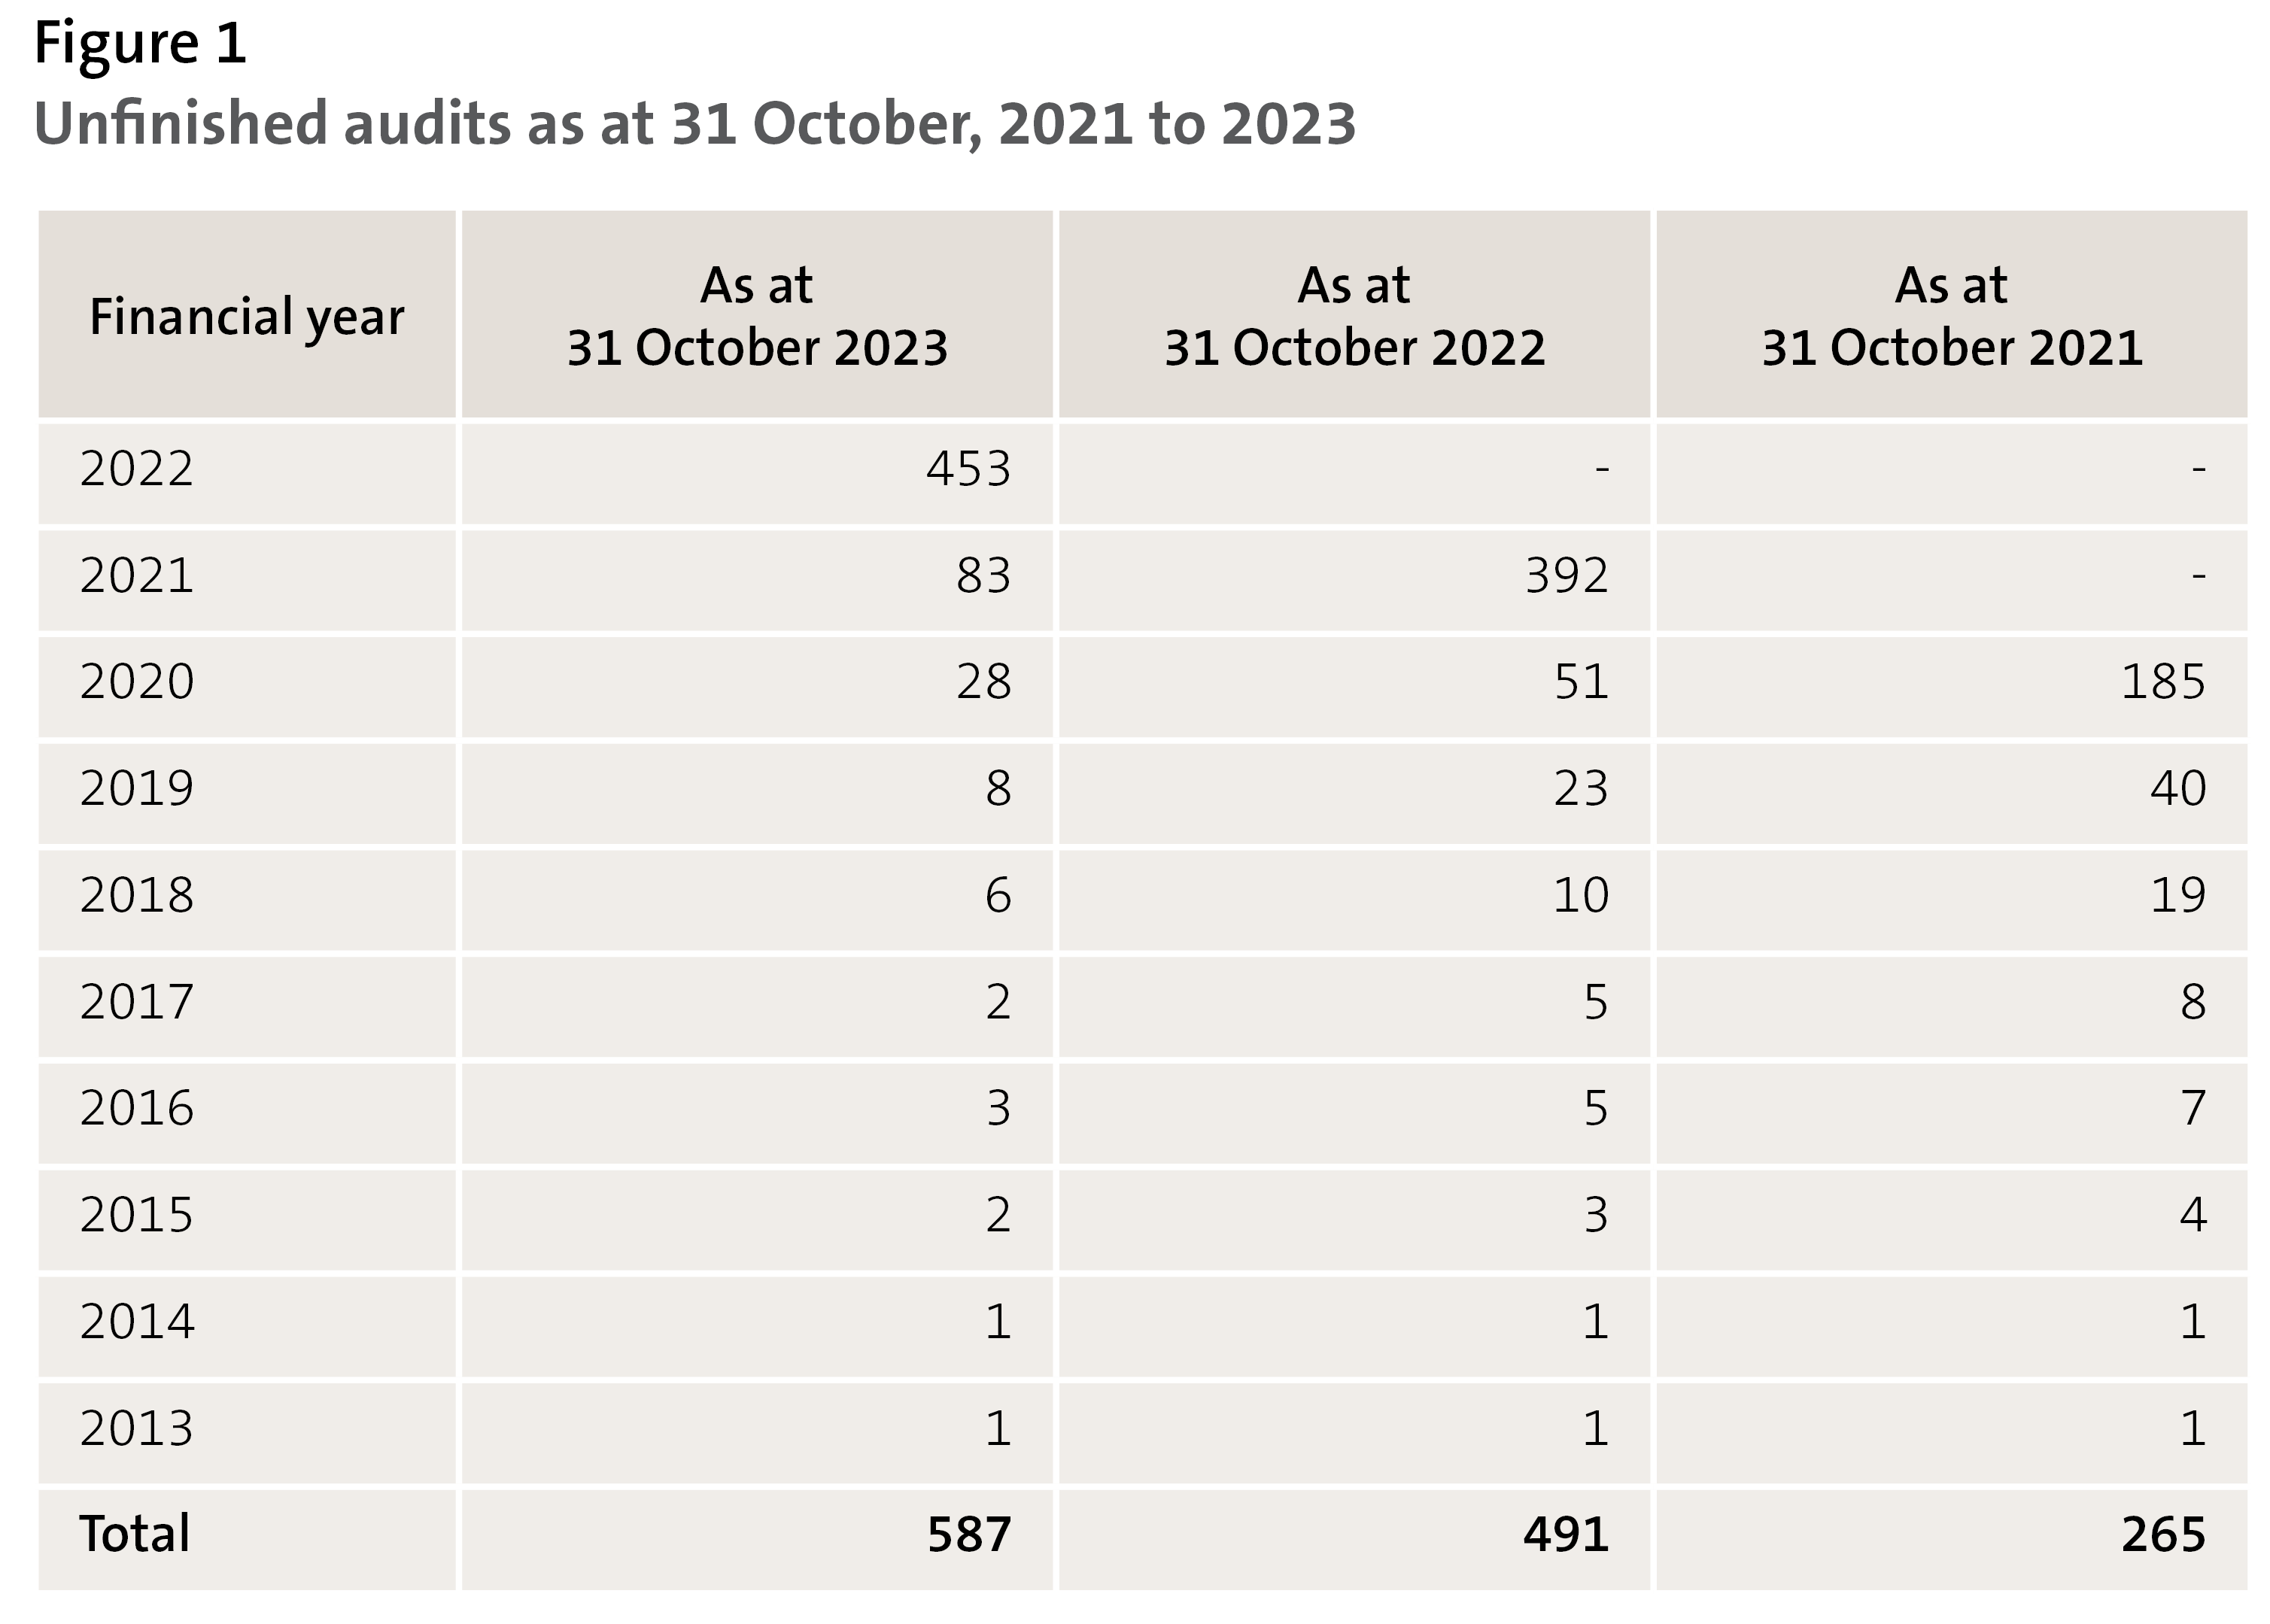 Figure 1 - Unfinished audits as at 31 October, 2021 to 2023